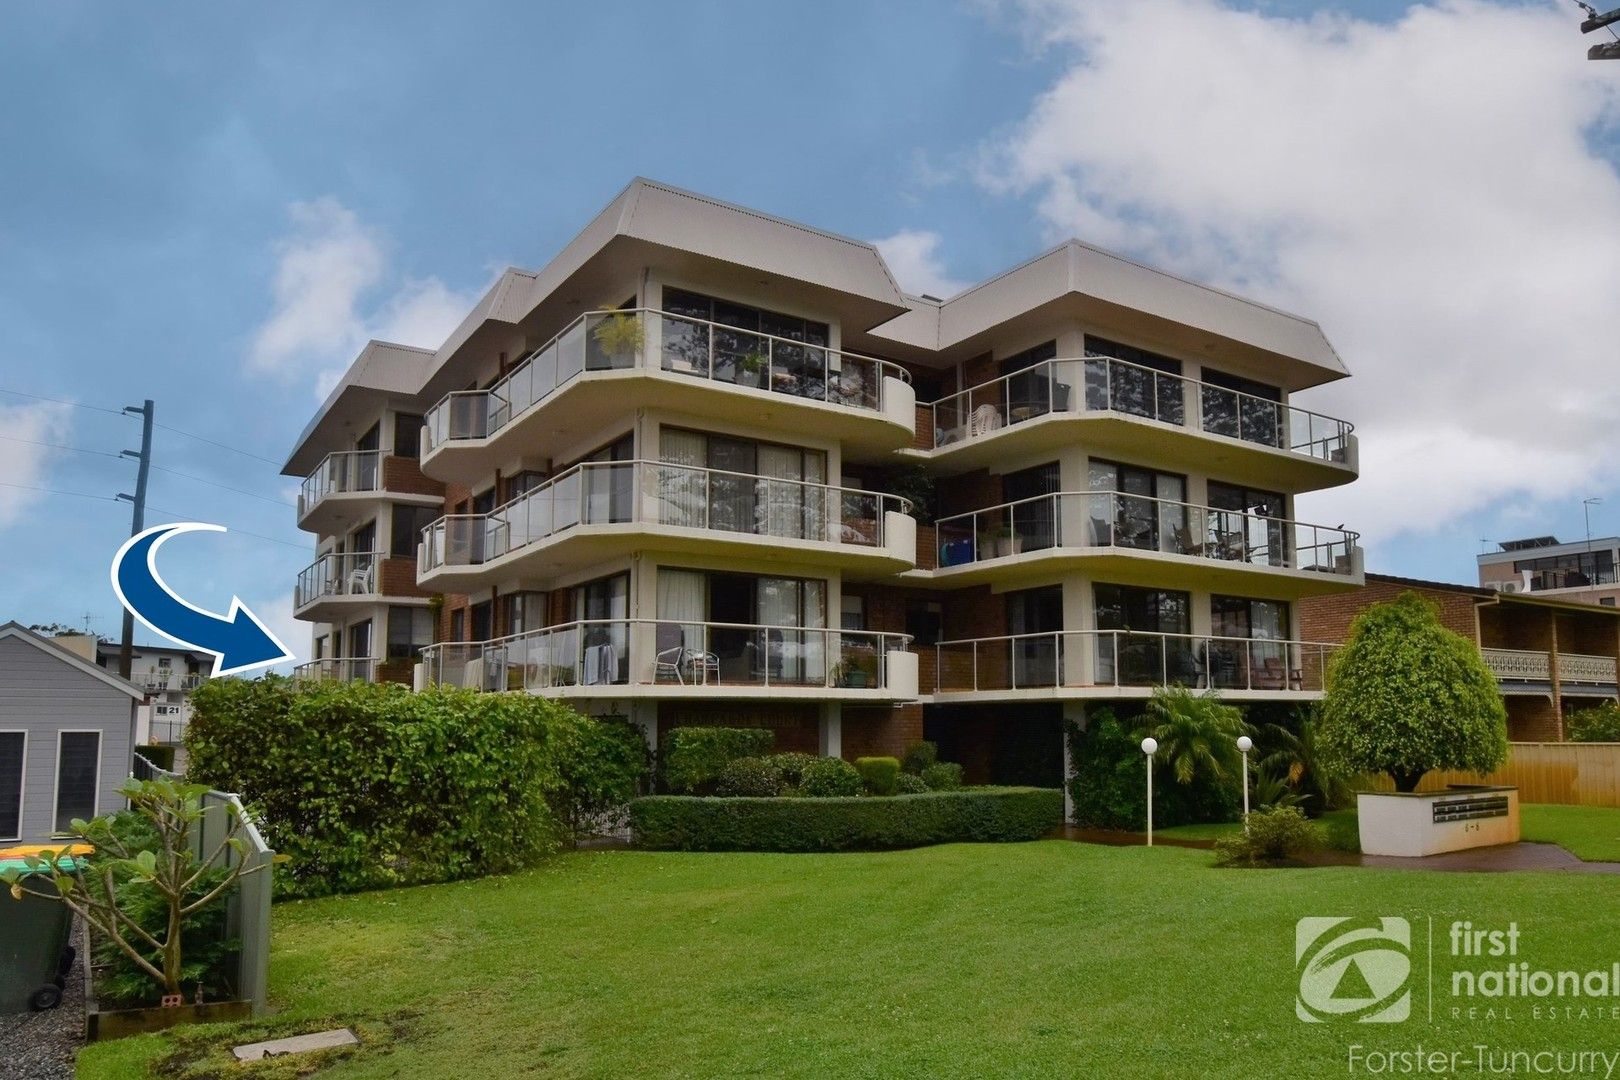 2 bedrooms Apartment / Unit / Flat in 3/6-8 Wharf Street TUNCURRY NSW, 2428